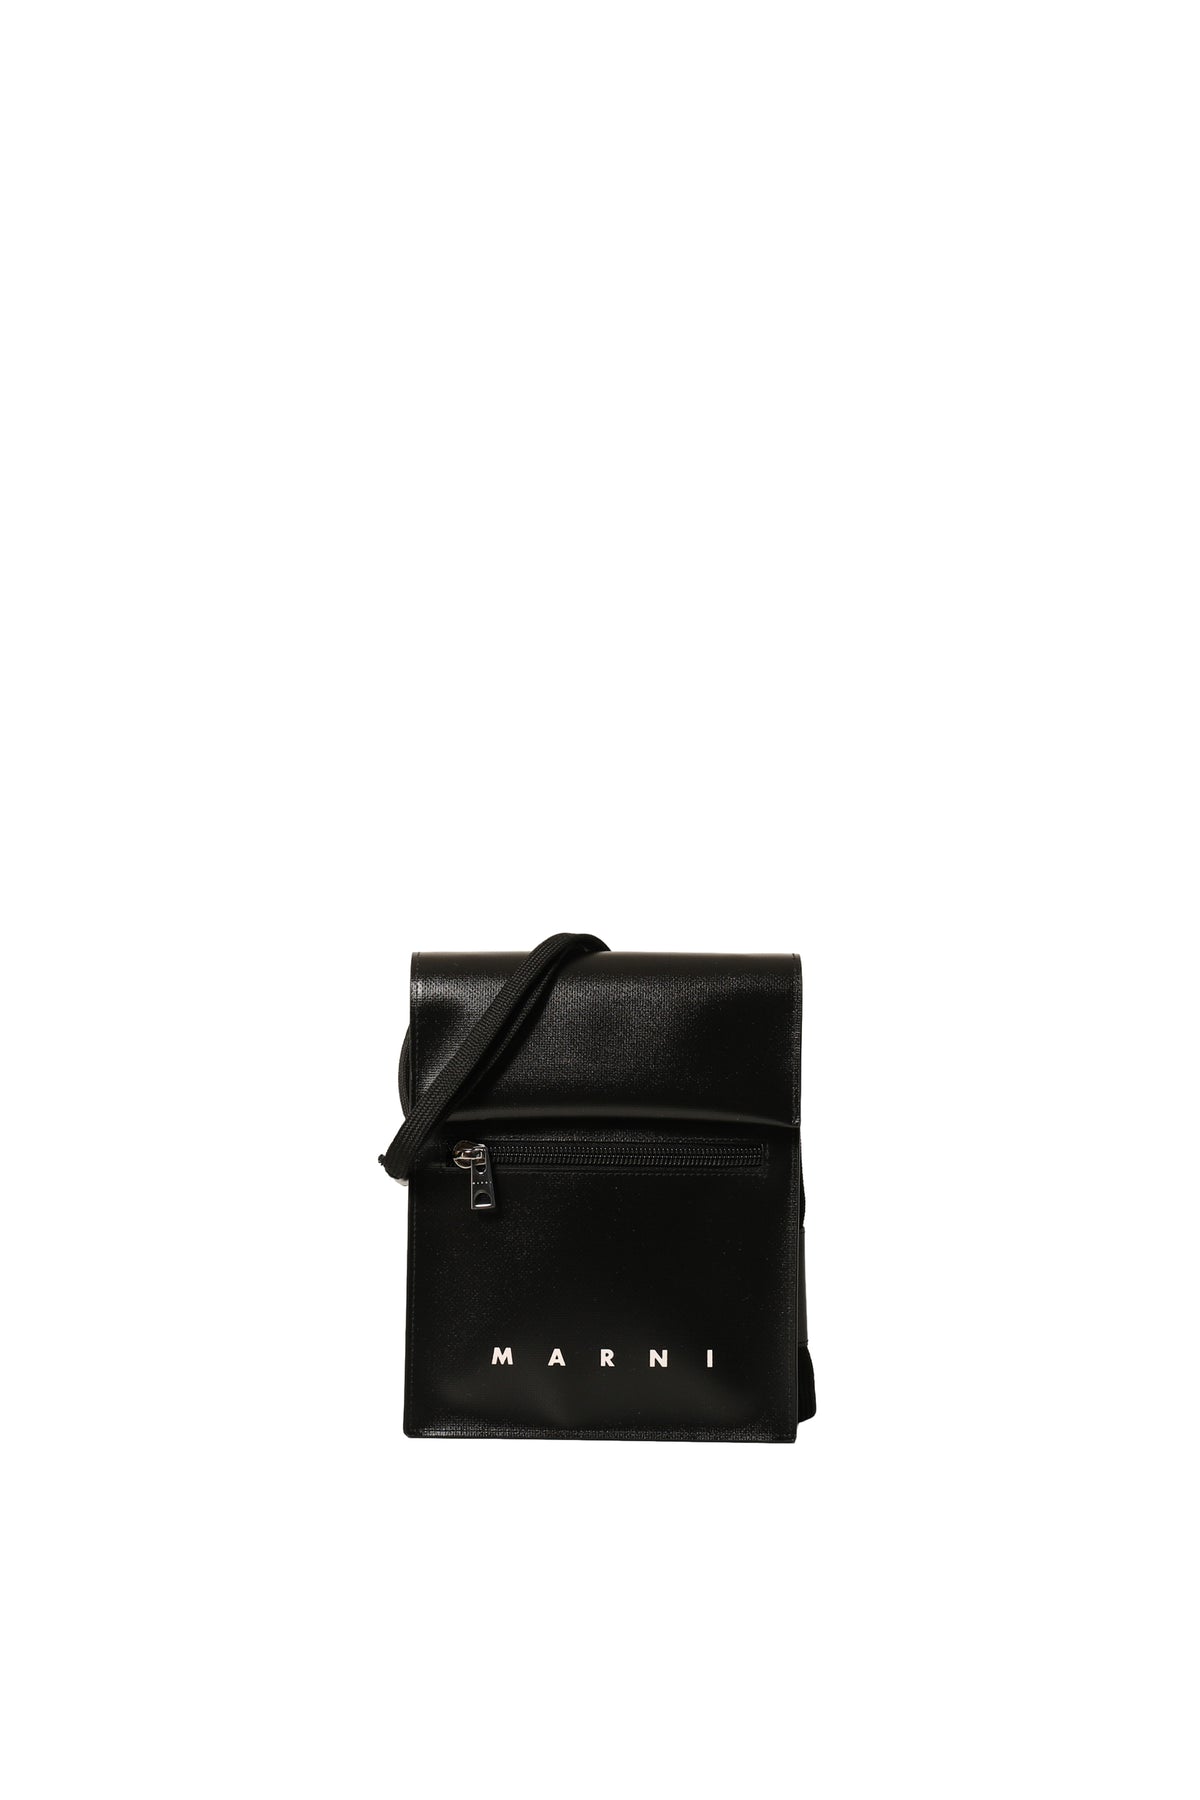 POUCH ON STRAP / BLK